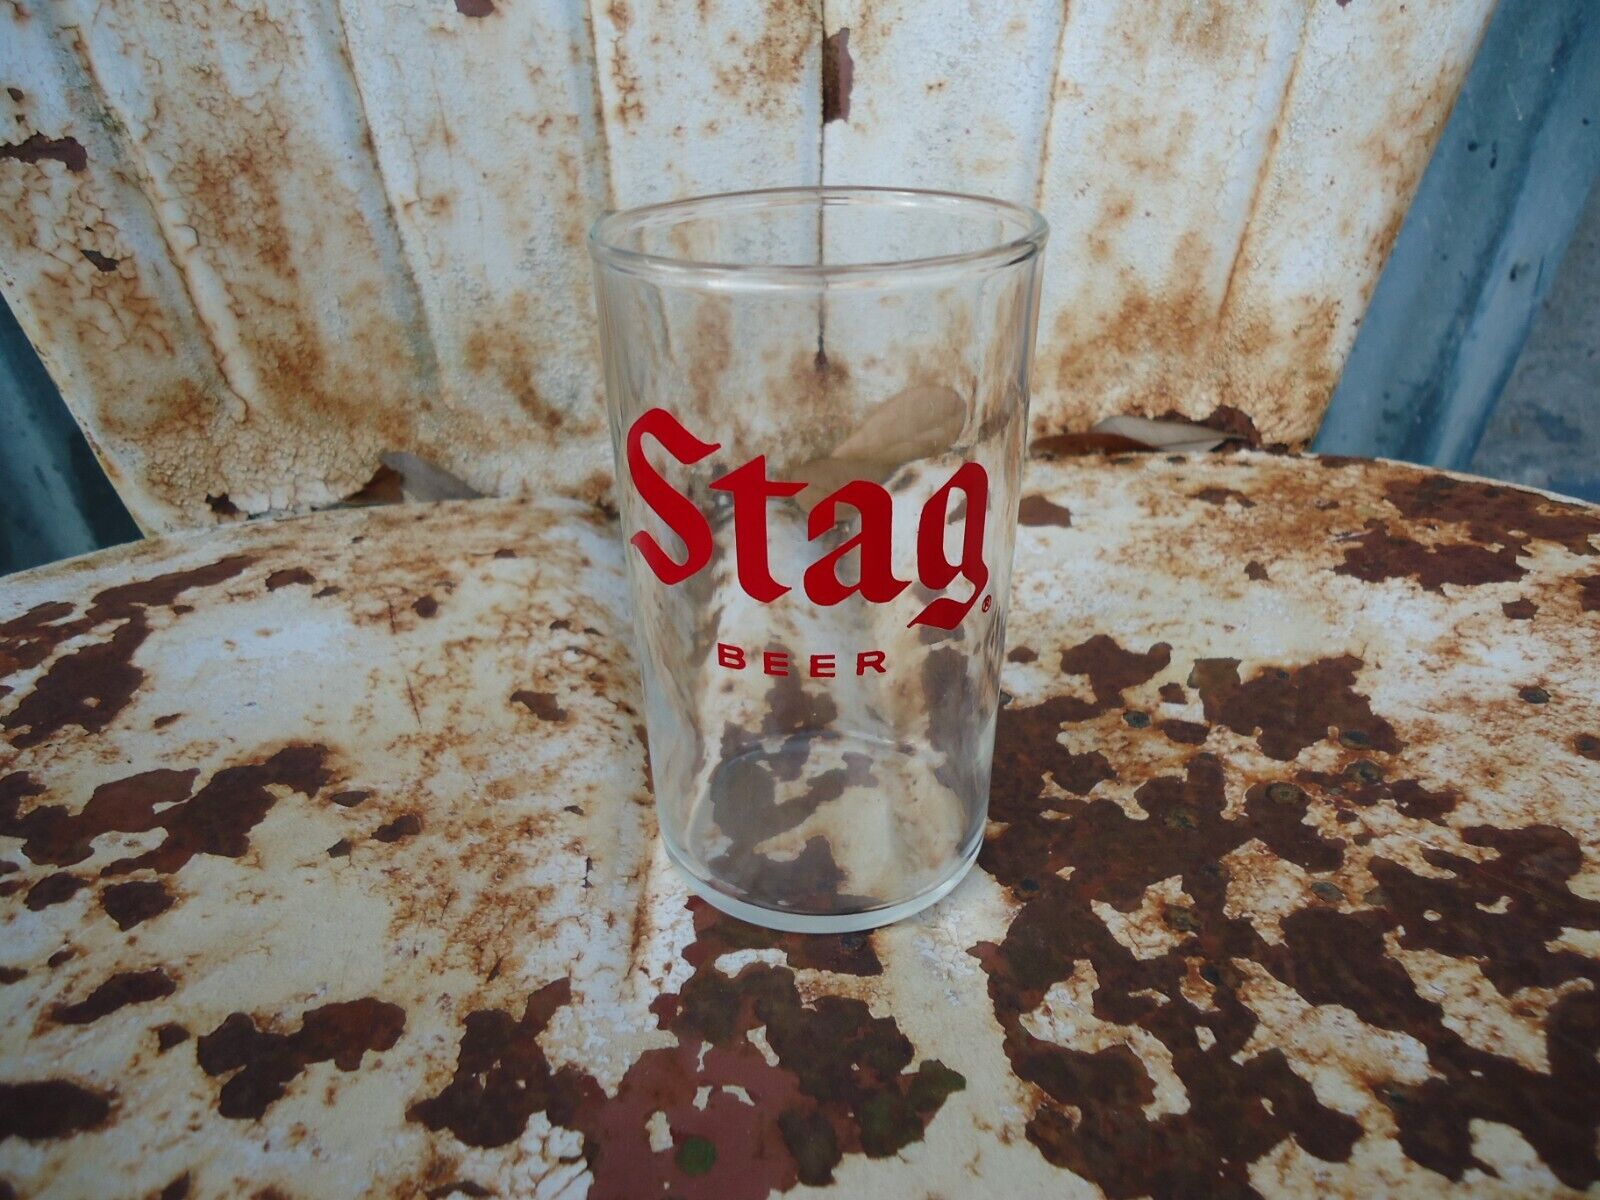 VINTAGE STAG BEER GLASS 4 INCH TALL BUY IT NOW VERY NICE